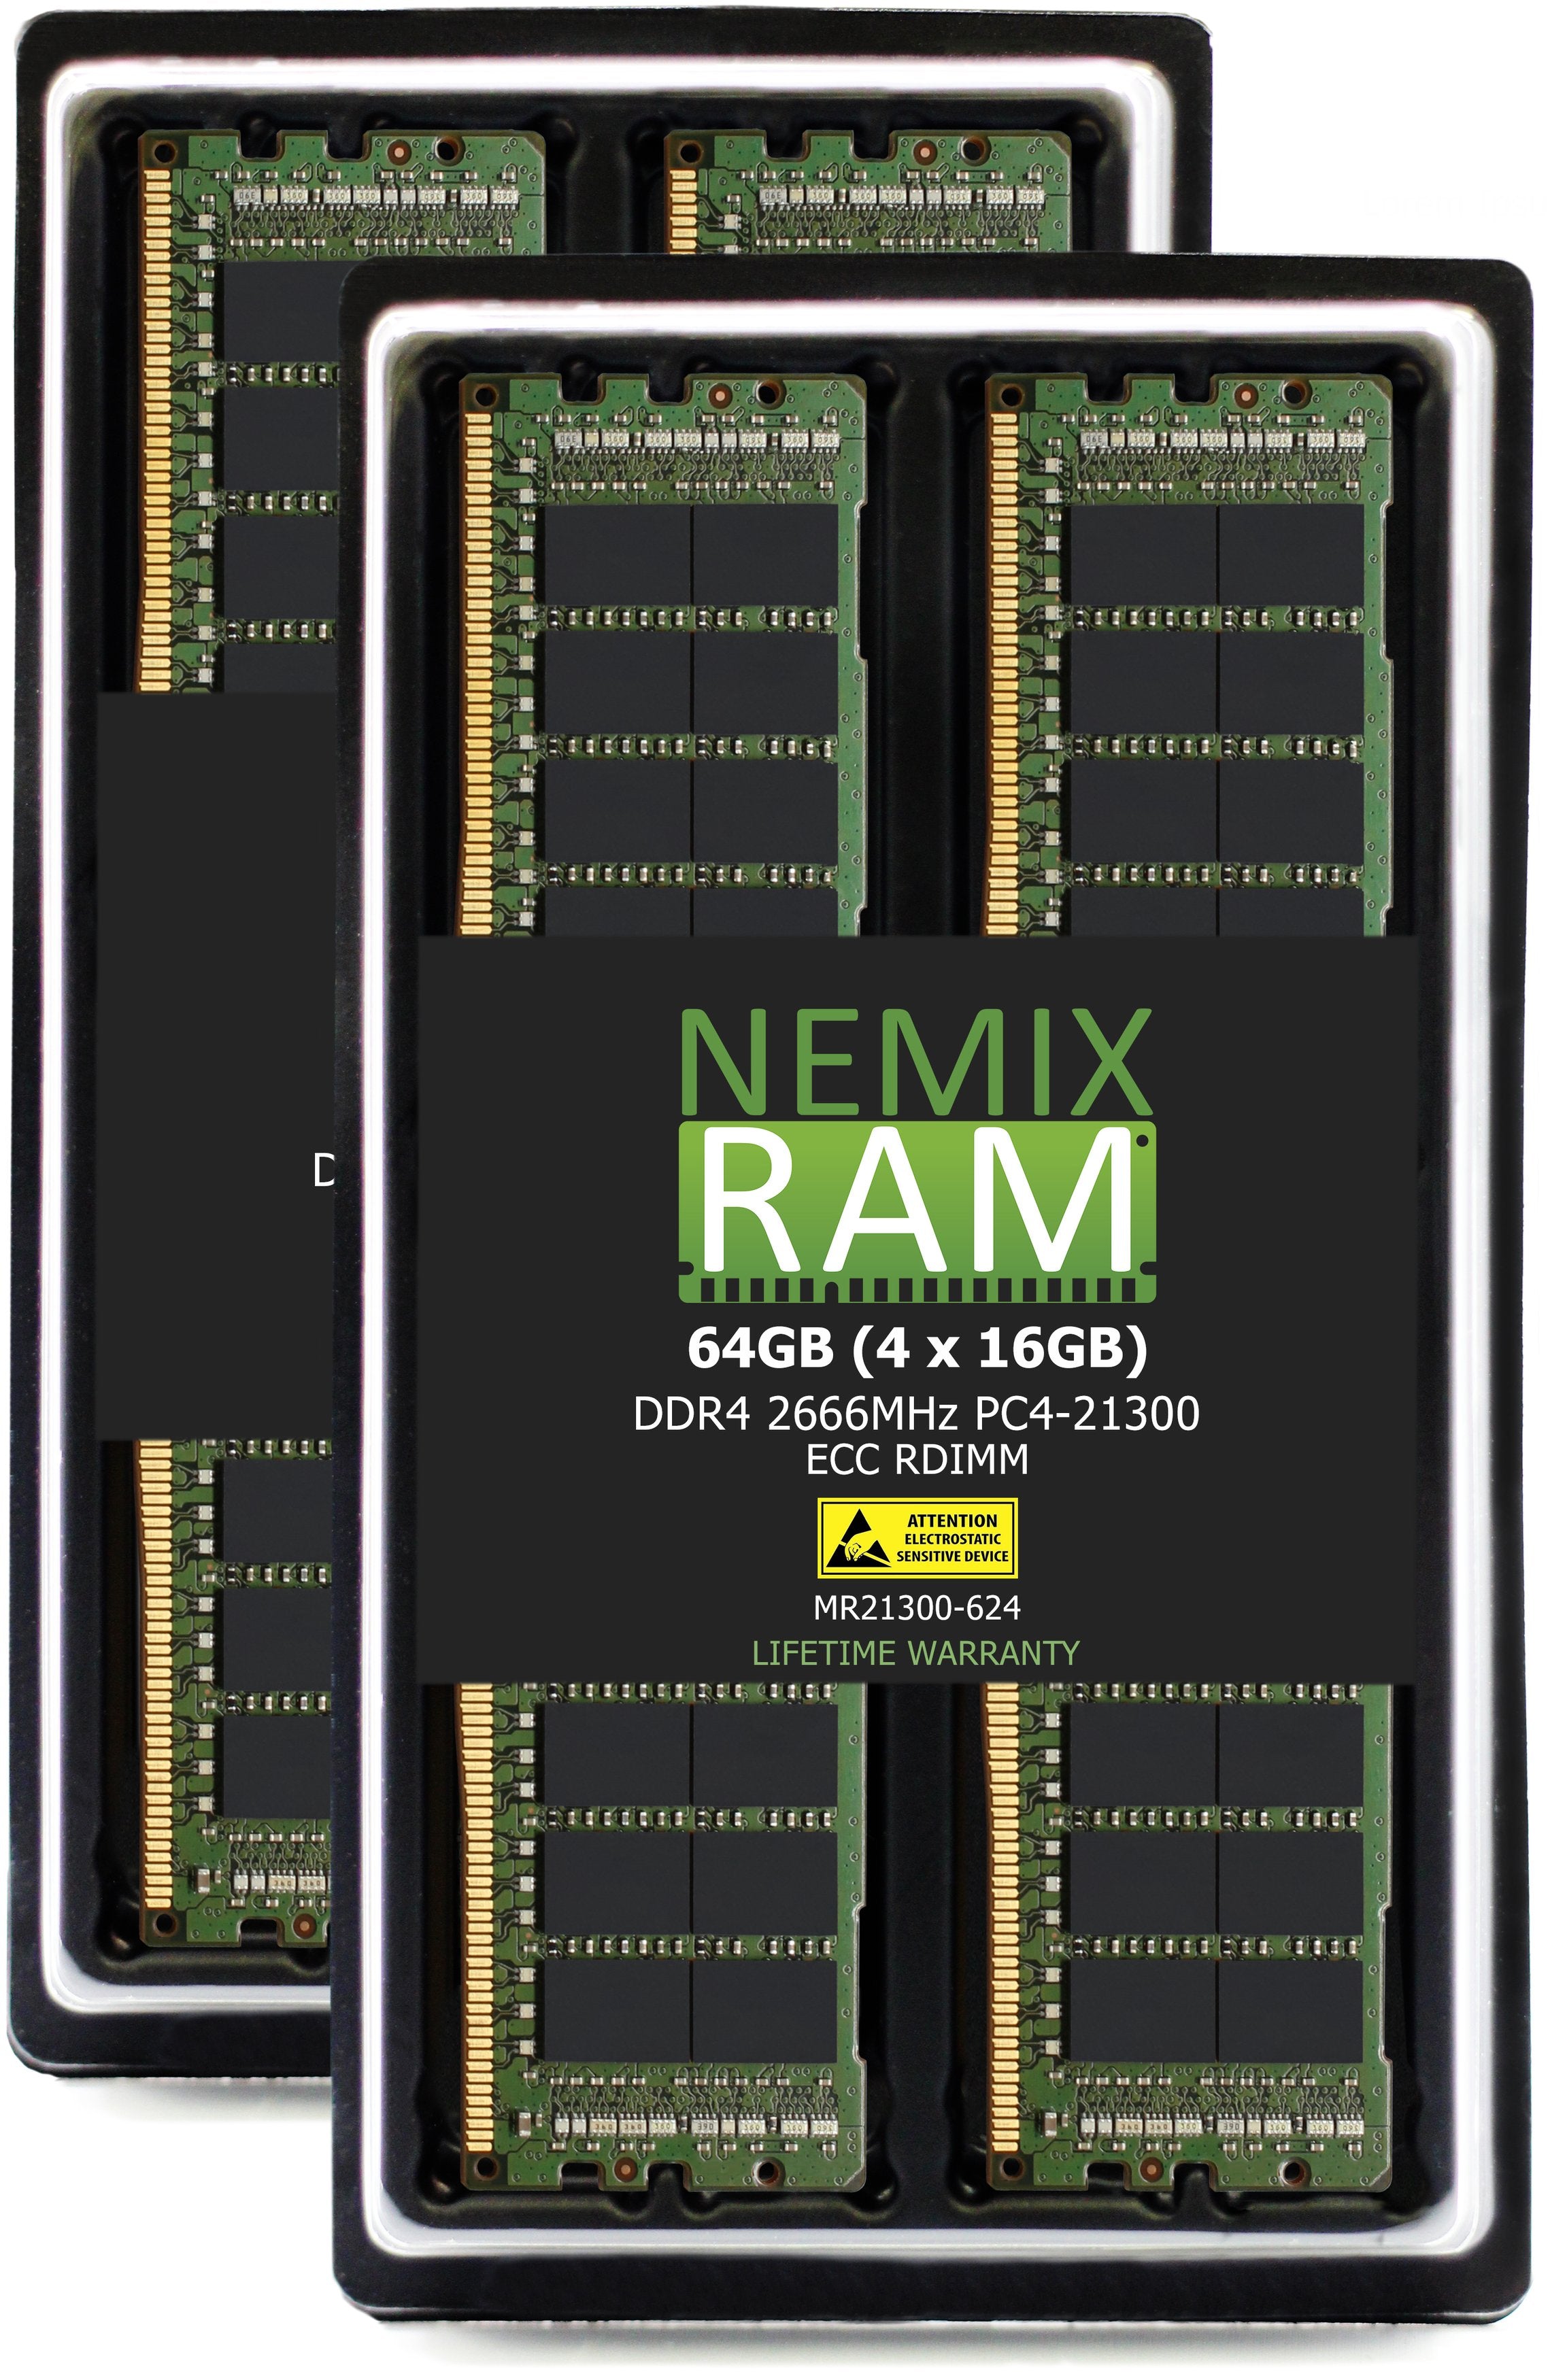 DDR4 2666MHZ PC4-21300 ECC RDIMM Compatible with Synology FlashStation FS3410